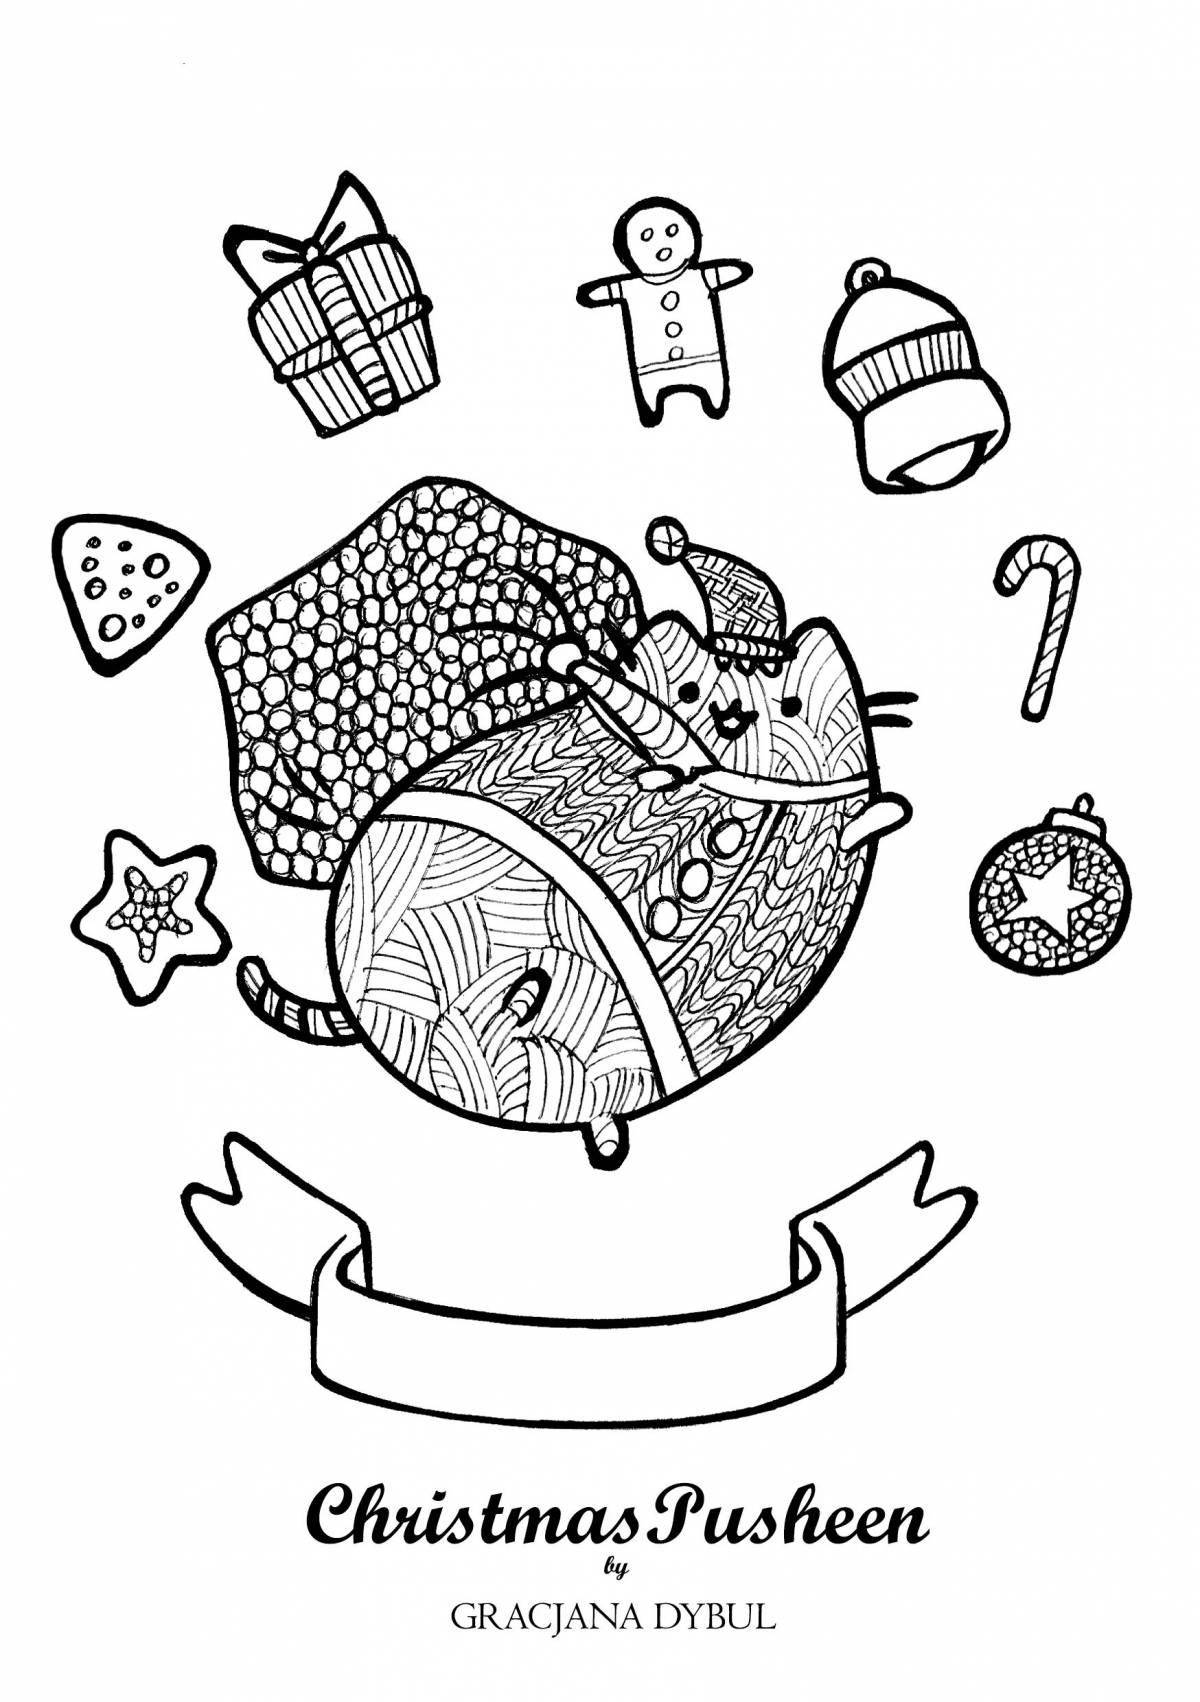 Pusheen happy new year coloring page